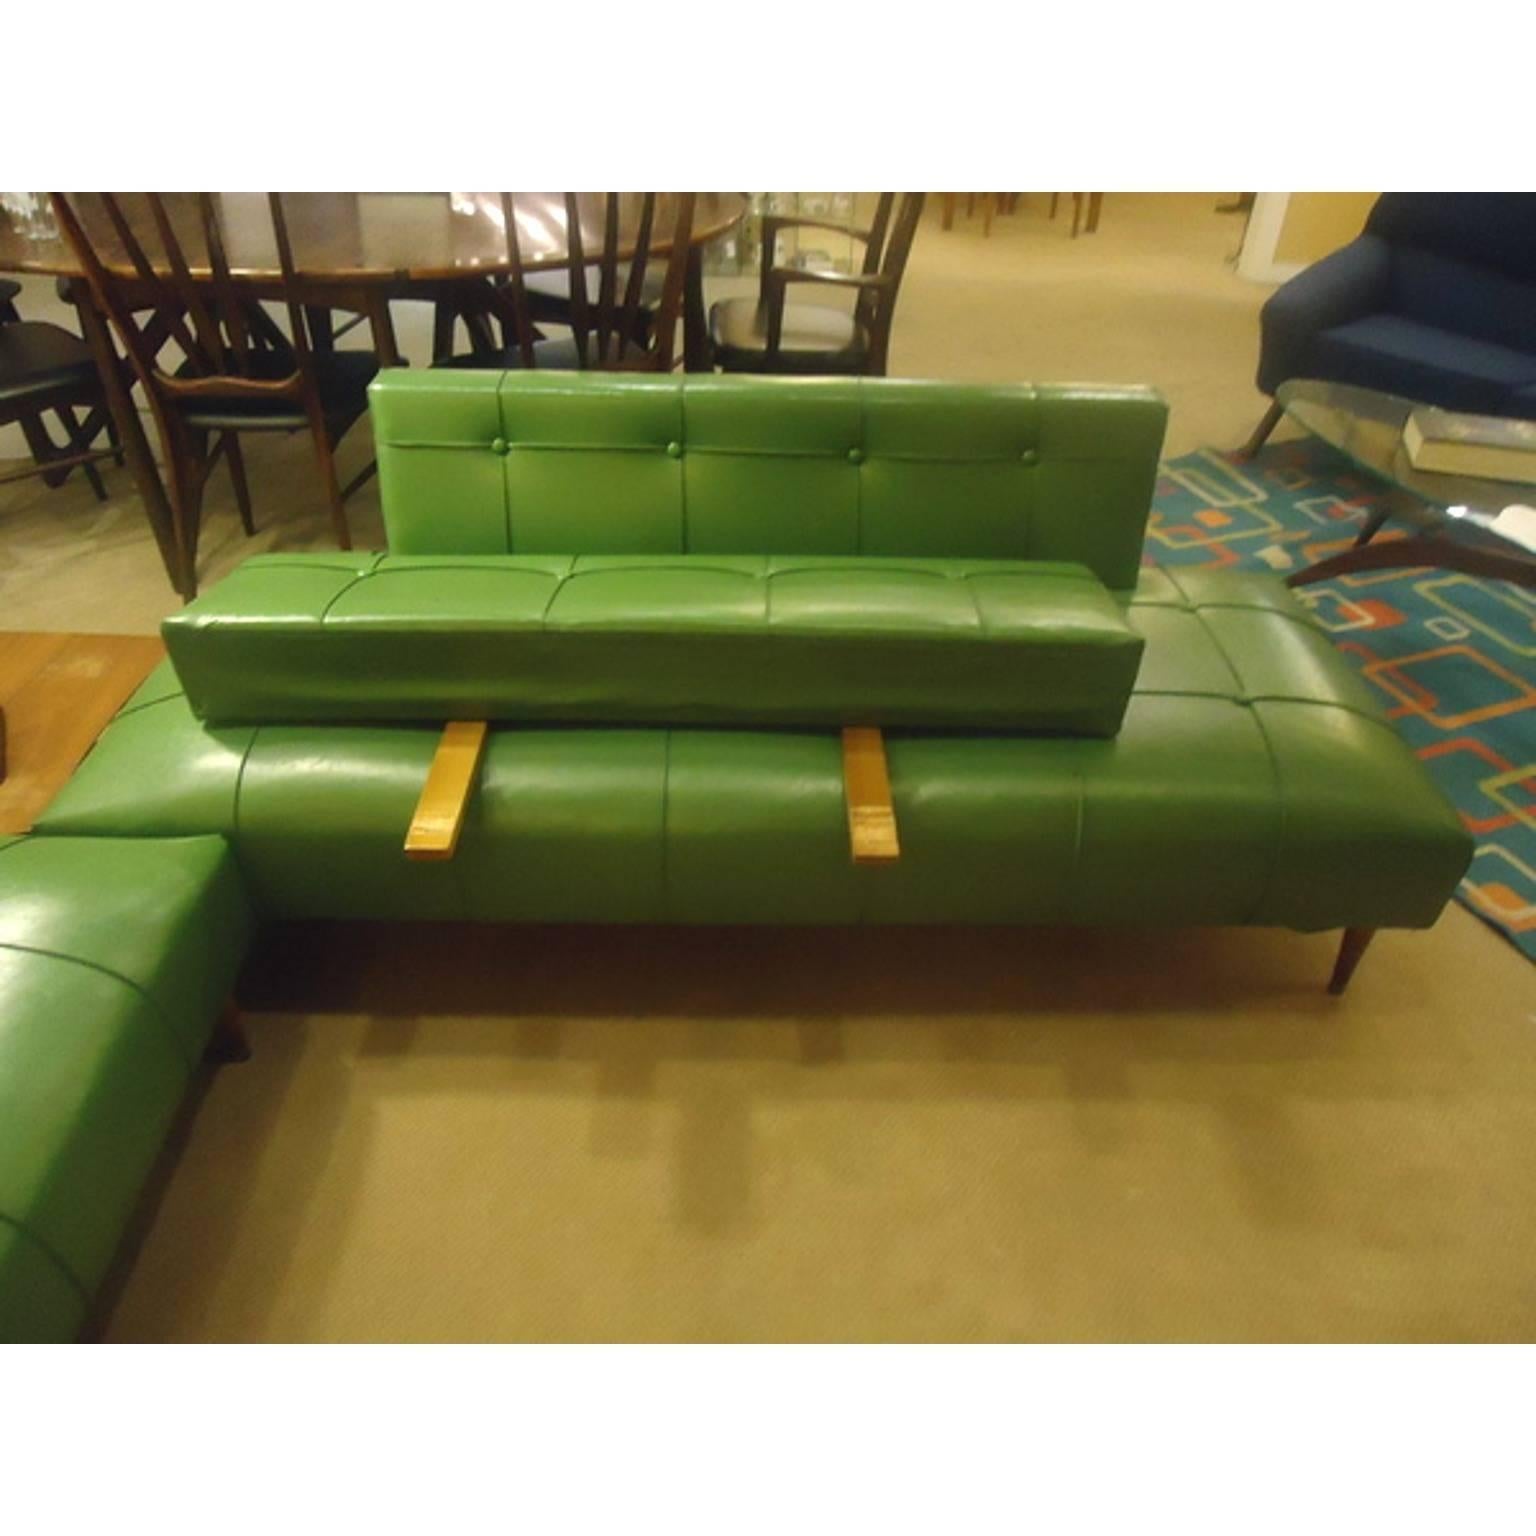 Great vintage daybeds.  Green Vinyl with a straw springs underneath.  These sofas are very comfortable.  They could be used in a spare room or a game room and then the backs could be removed for guests to sleep.  All in original condition with no